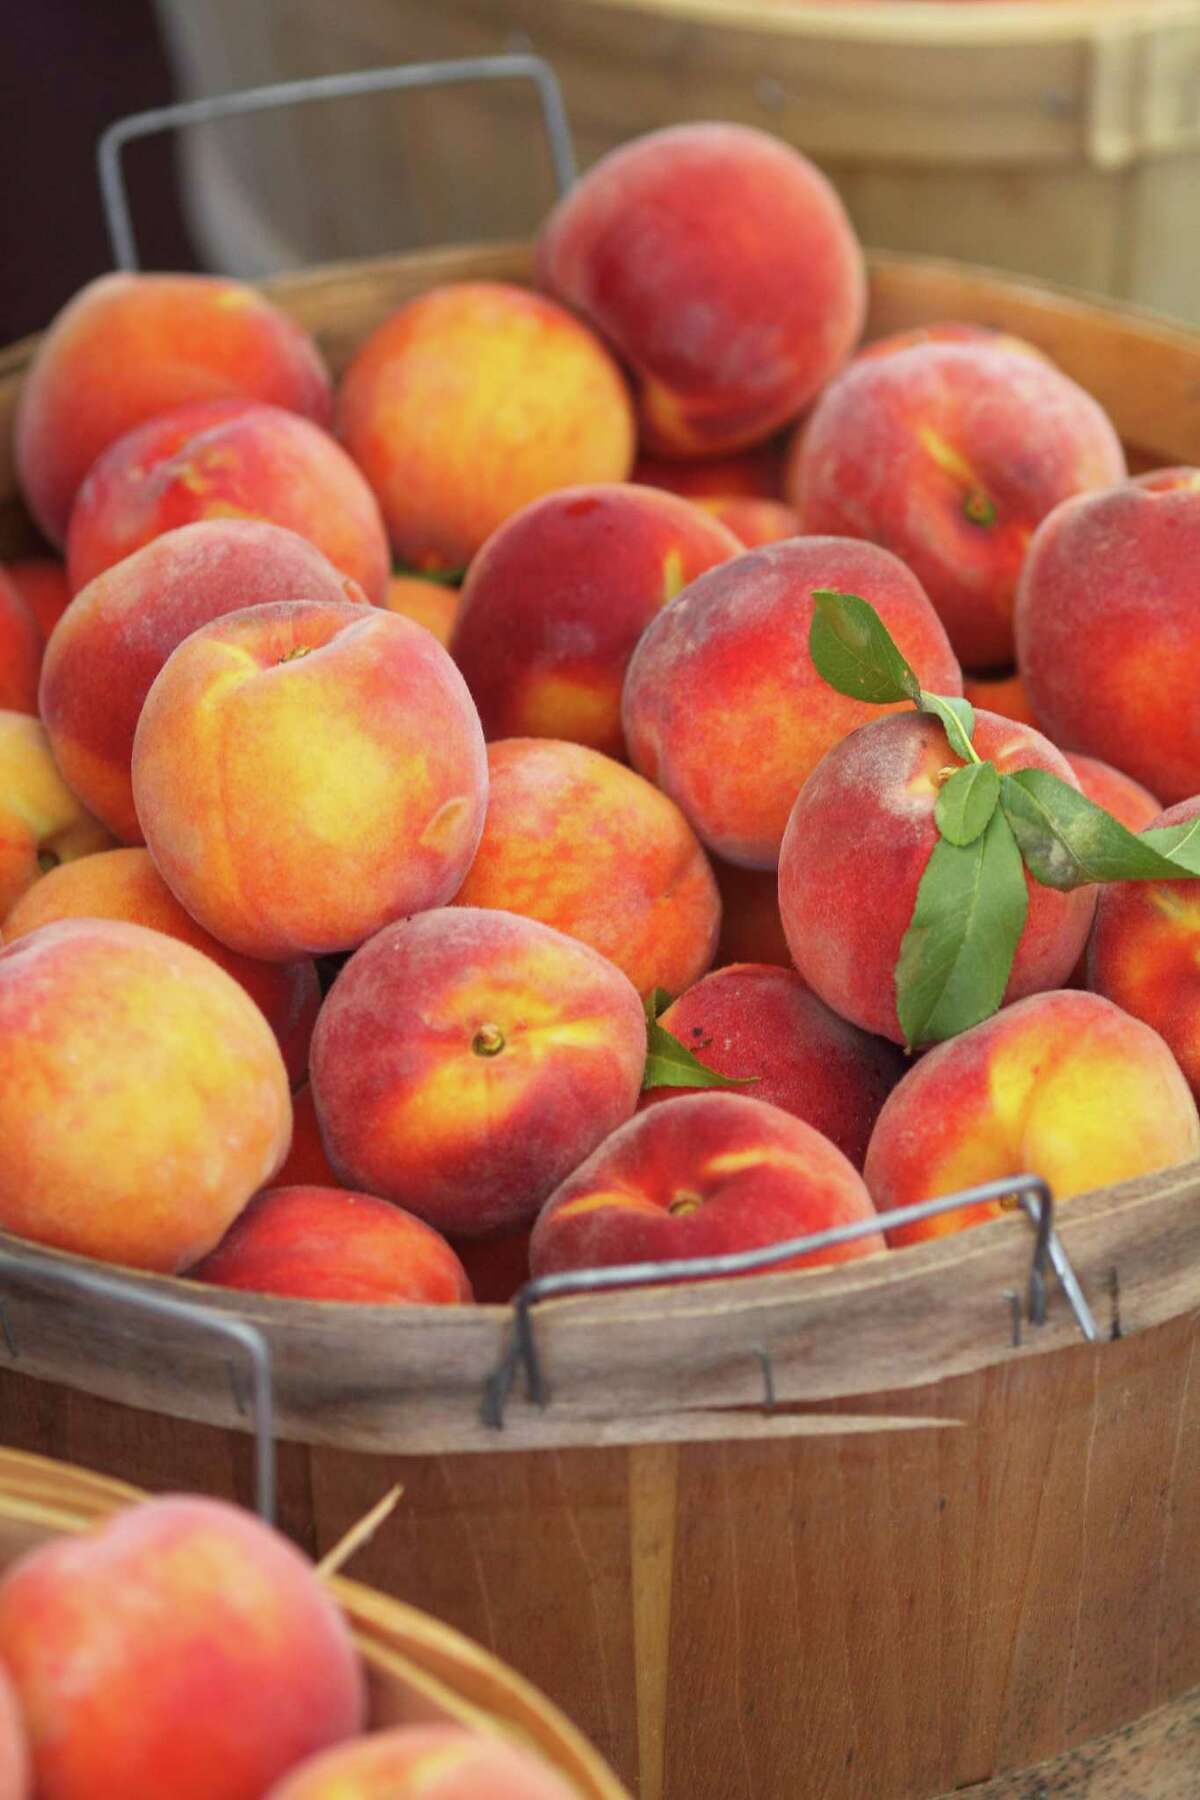 Summer peaches are great for popsicles.